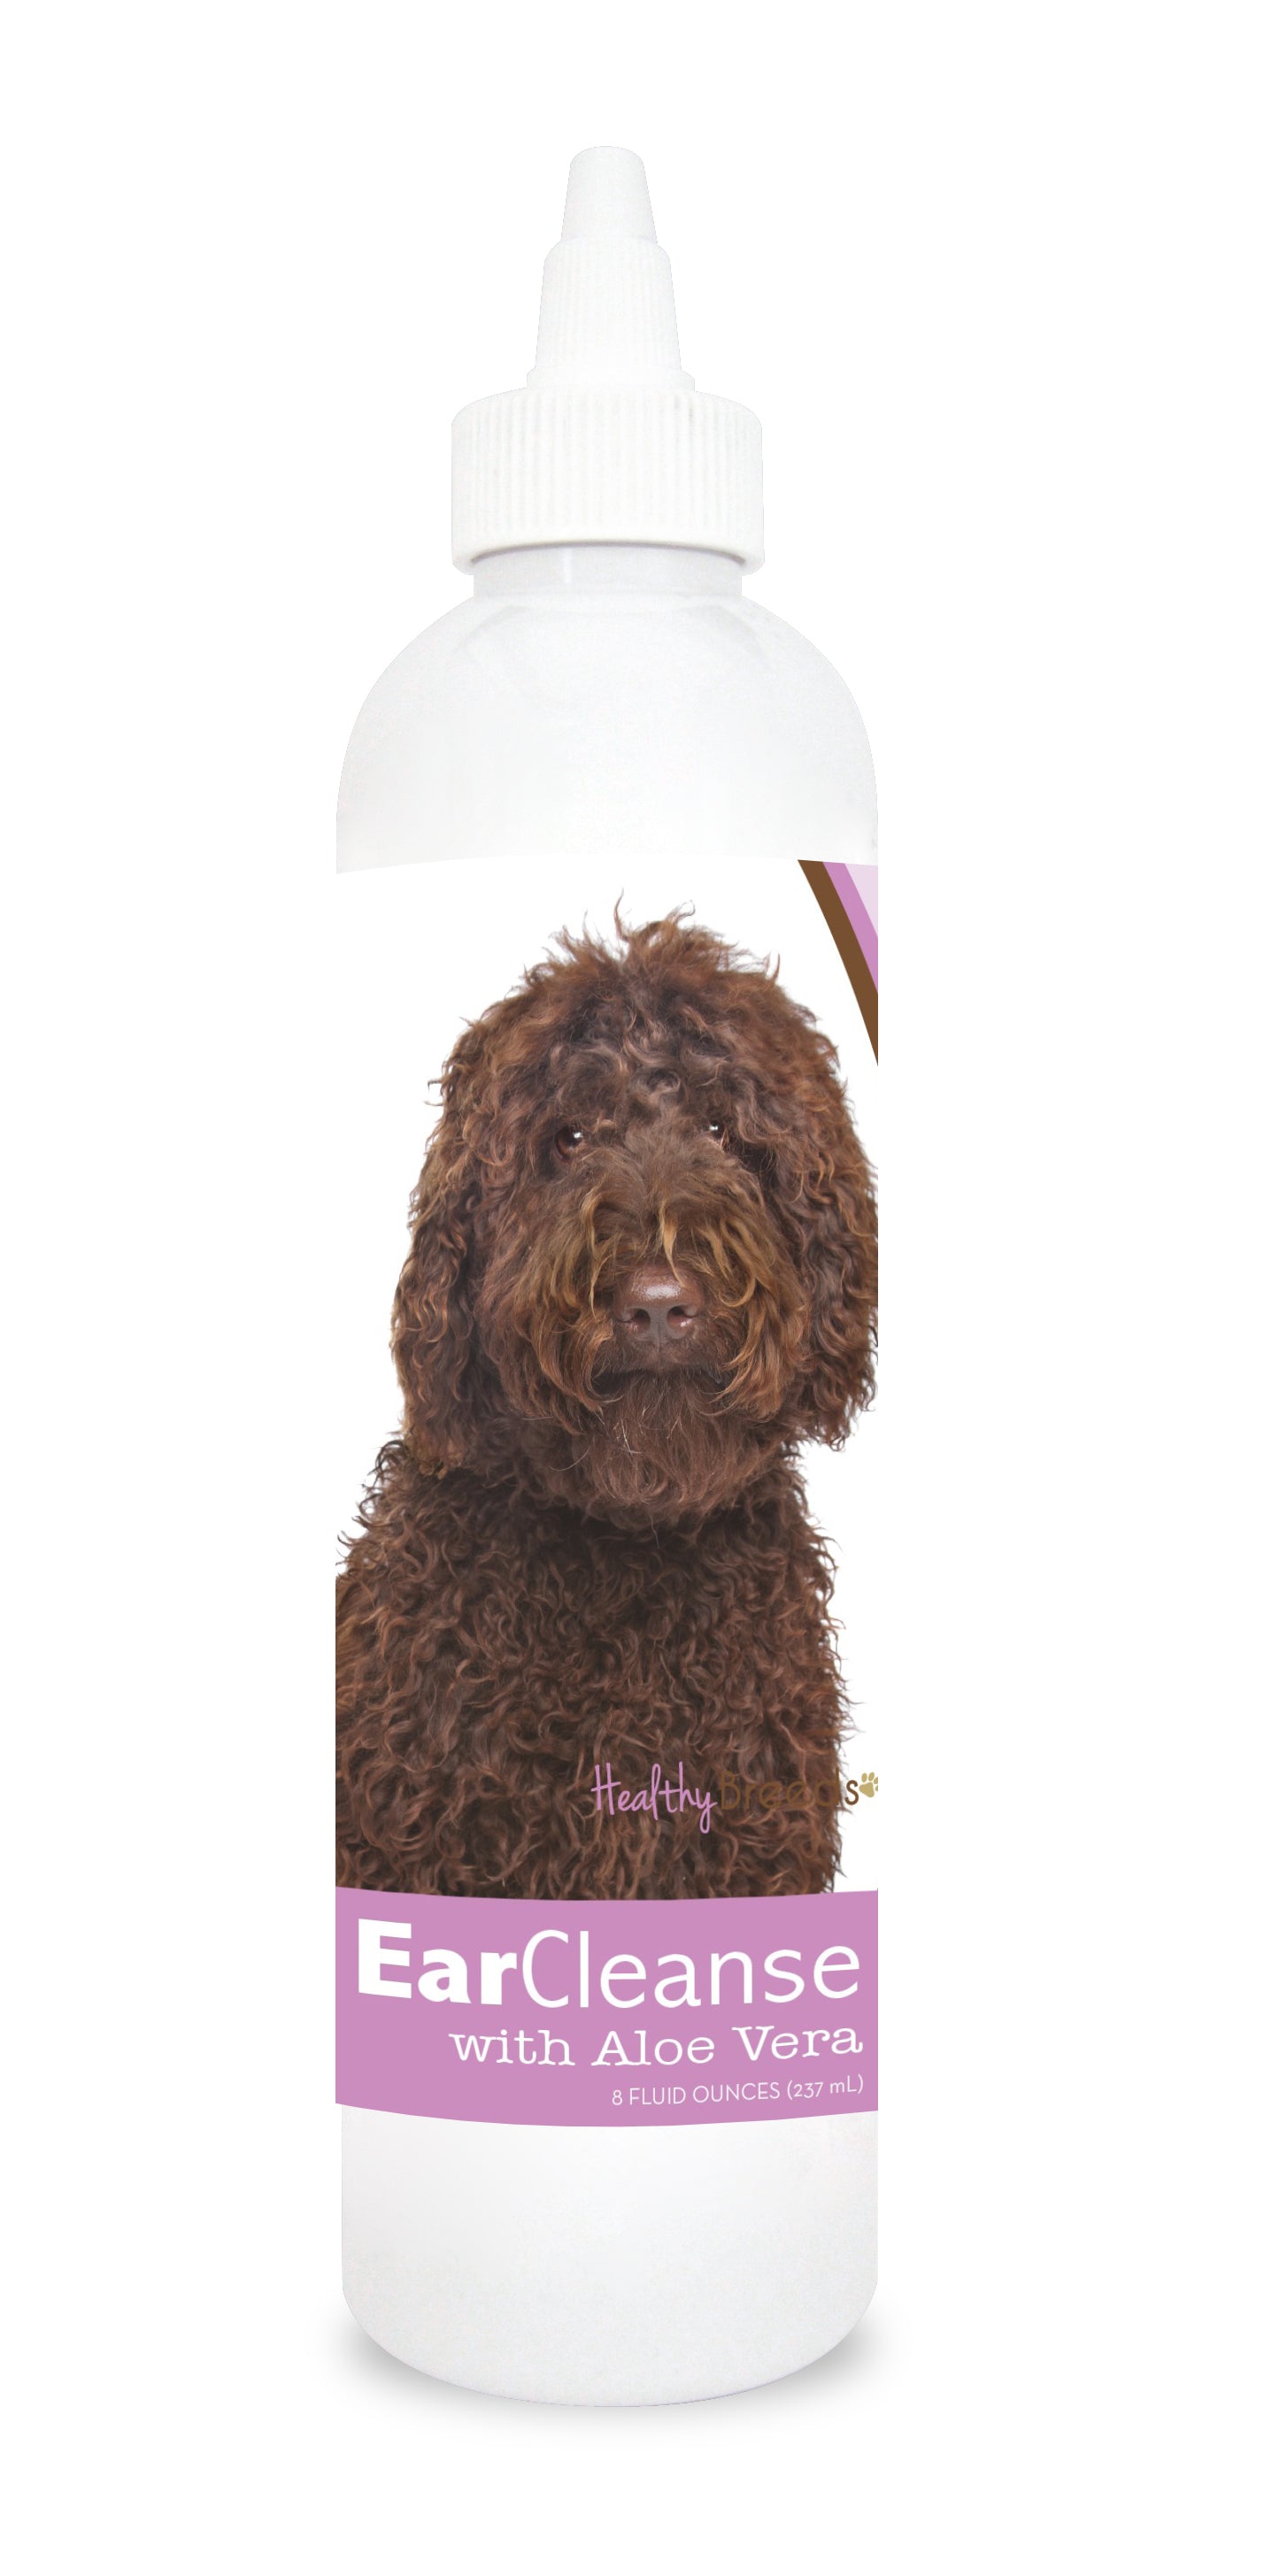 Labradoodle Ear Cleanse with Aloe Vera Sweet Pea and Vanilla 8 oz